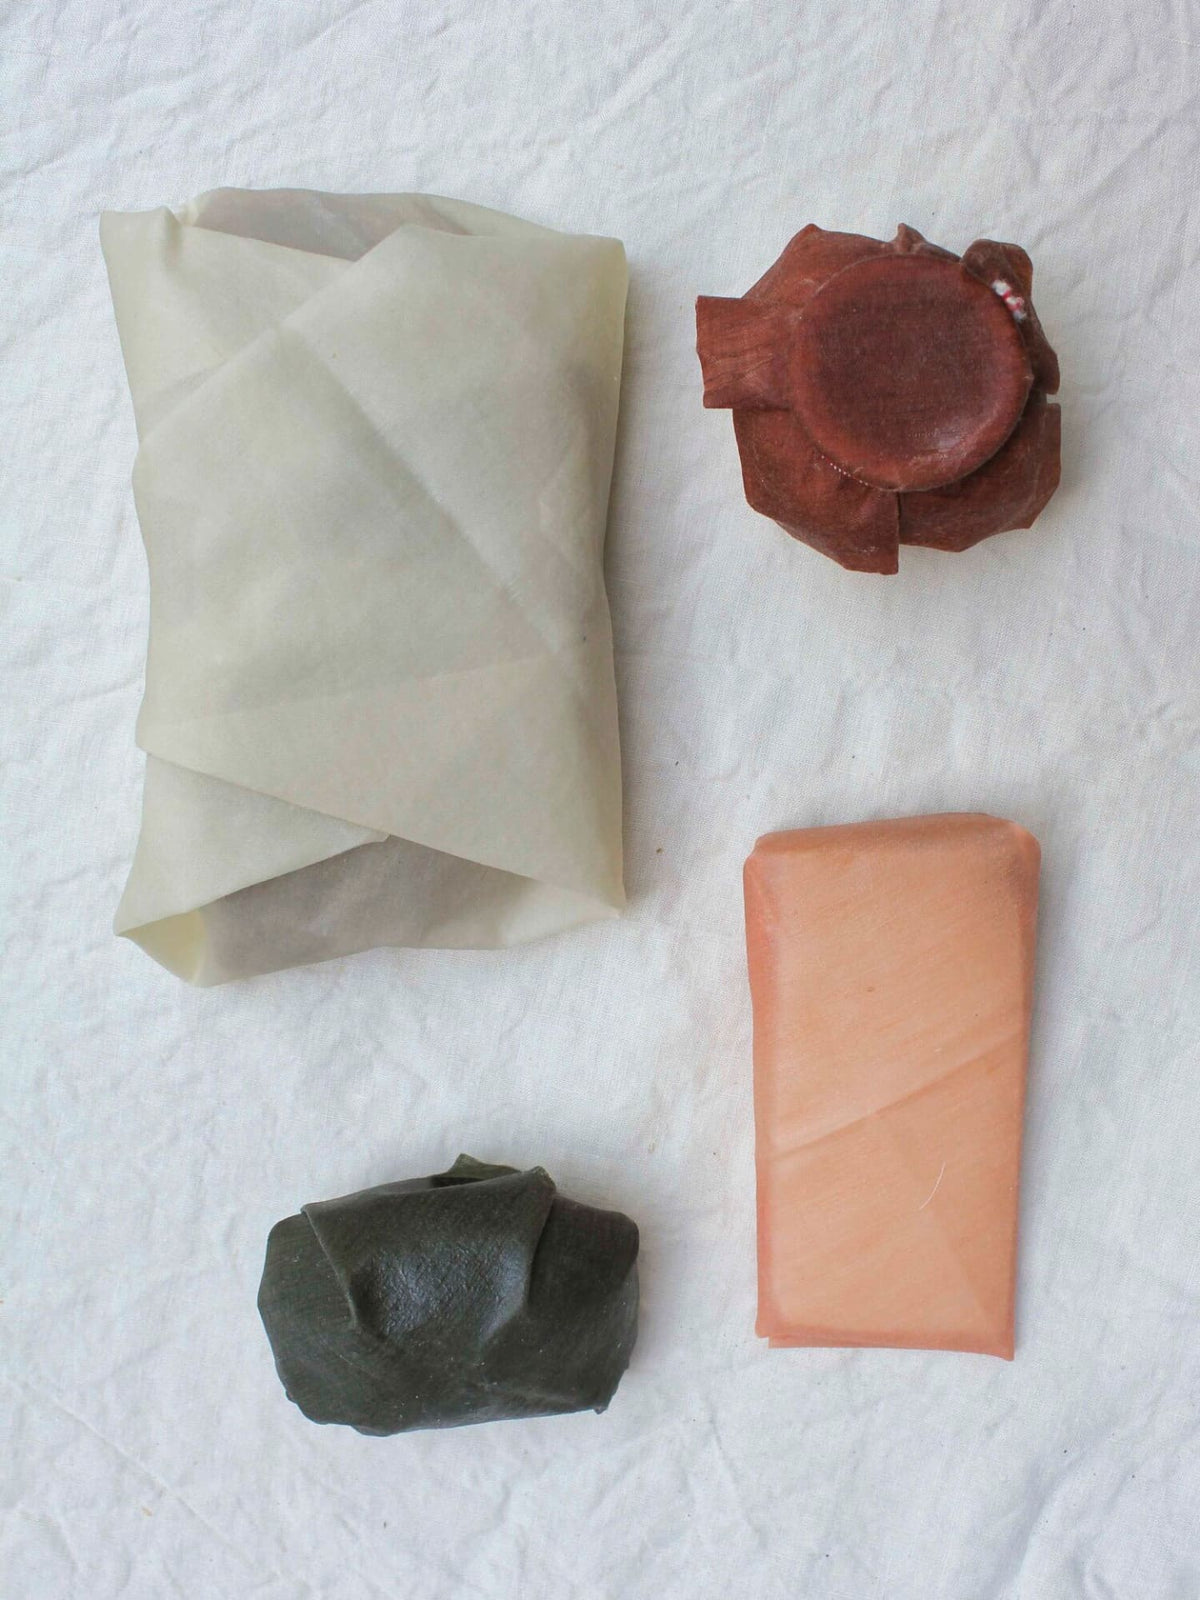 Four pieces of Ivy ⋄ Madder ⋄ Indigo Waxed Linen Food Wraps displayed on a white background as a sustainable alternative to plastic clingfilm by Wax Atelier.